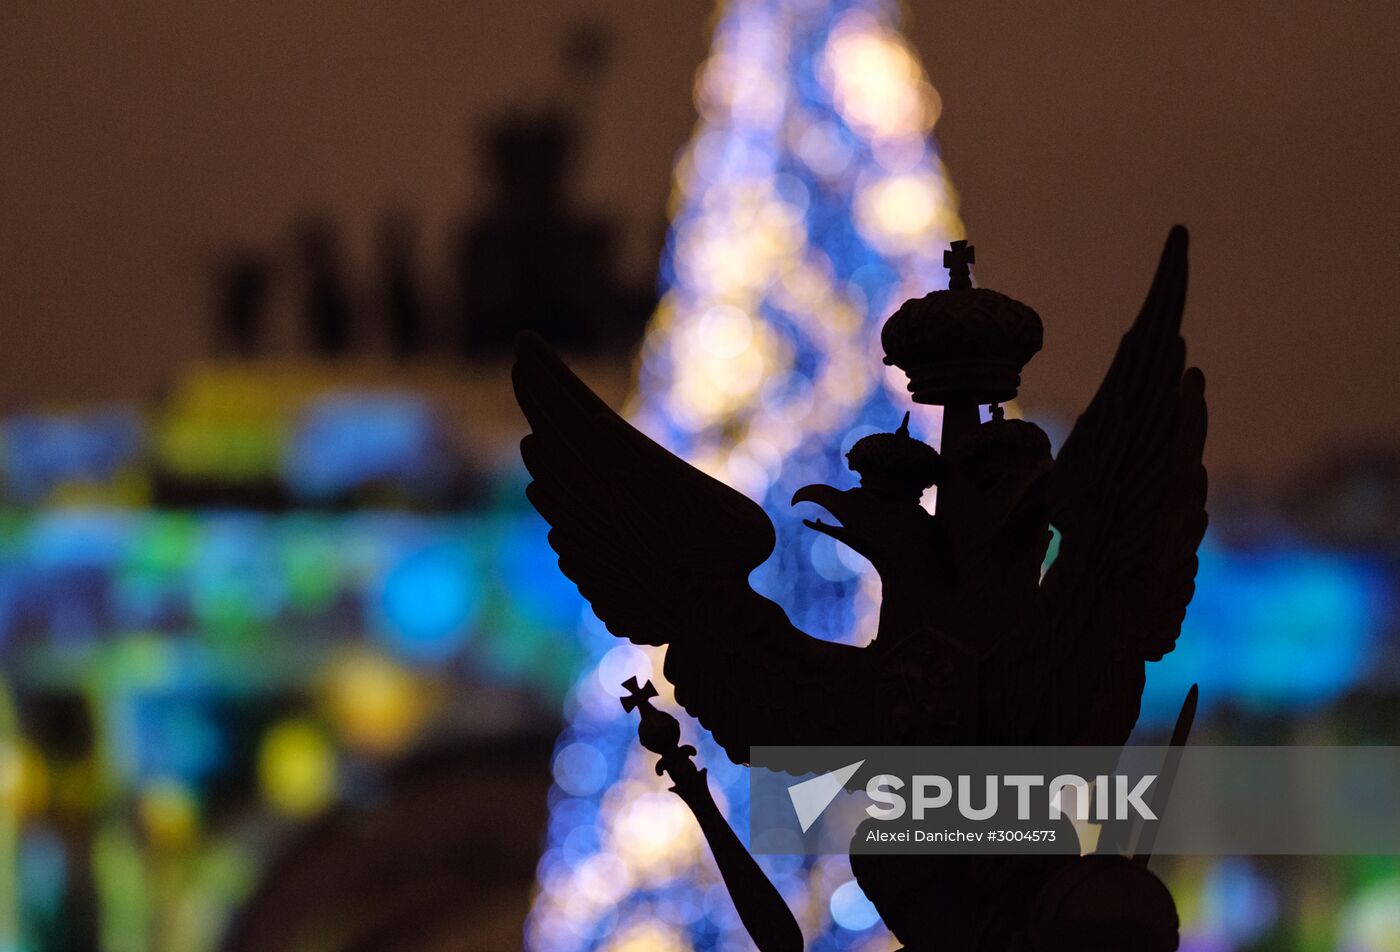 New Year's multimedia light show in St. Petersburg